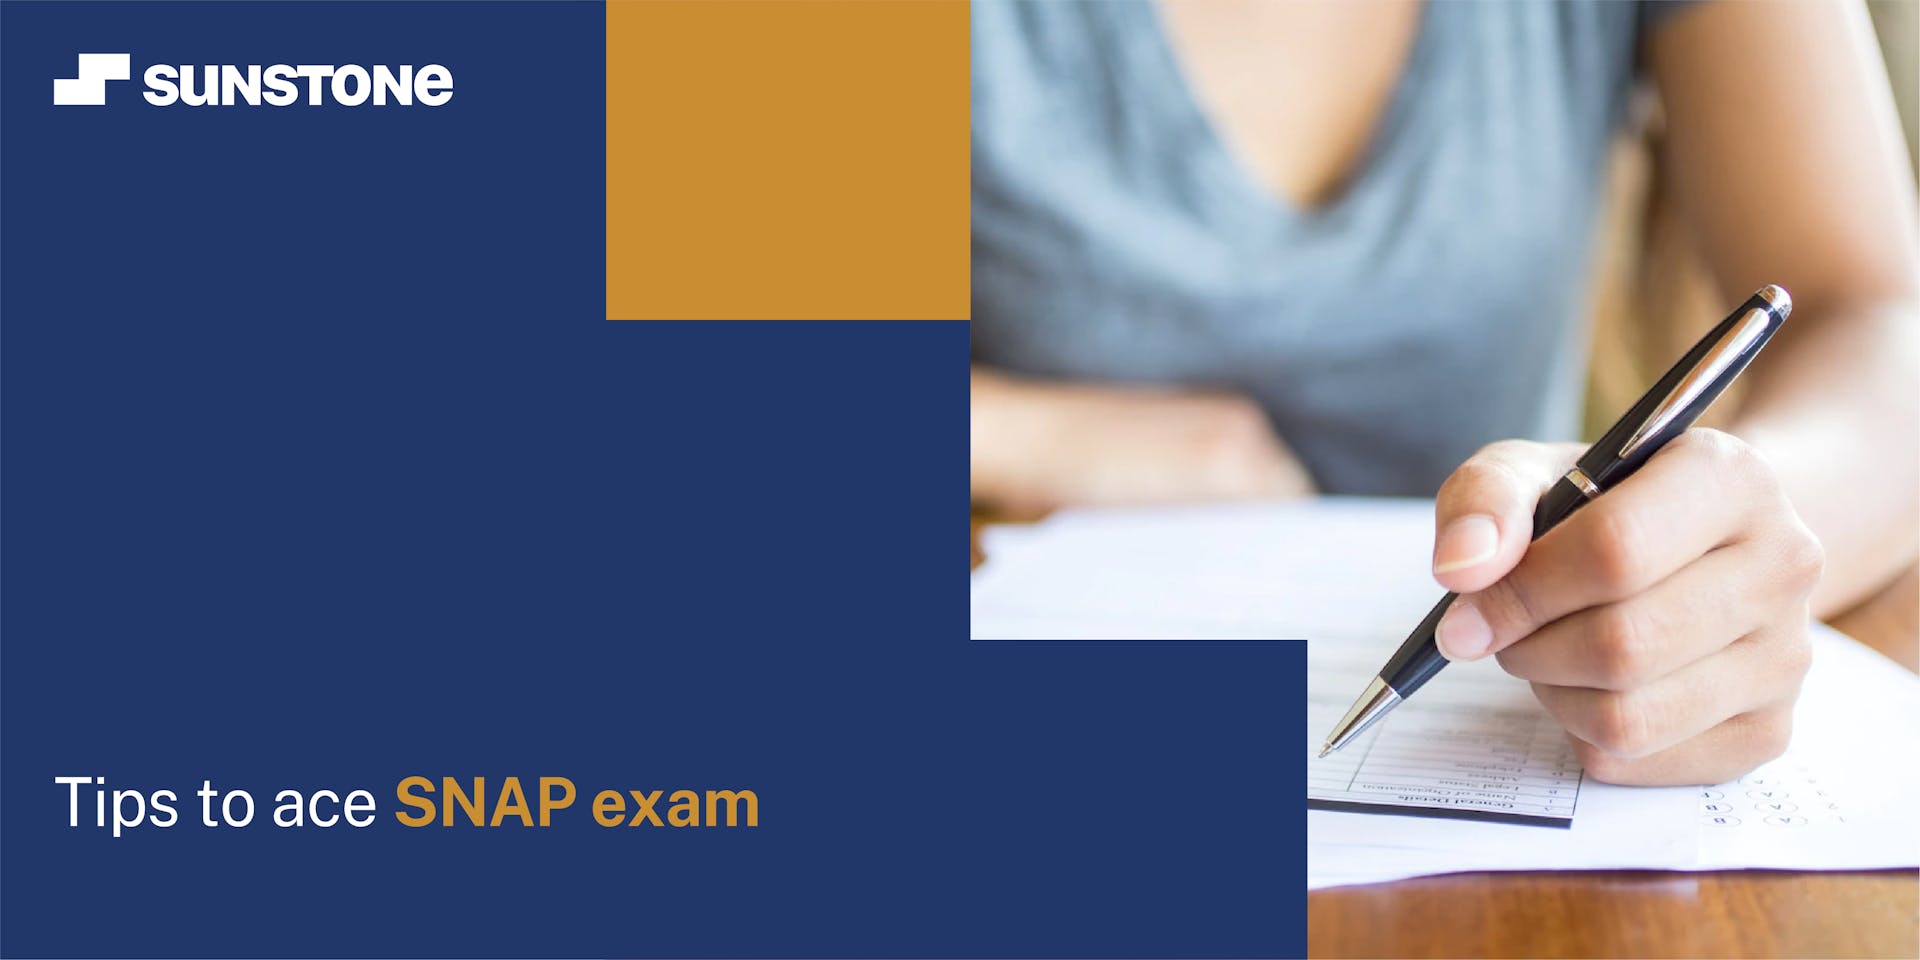 Tips to ace SNAP exam